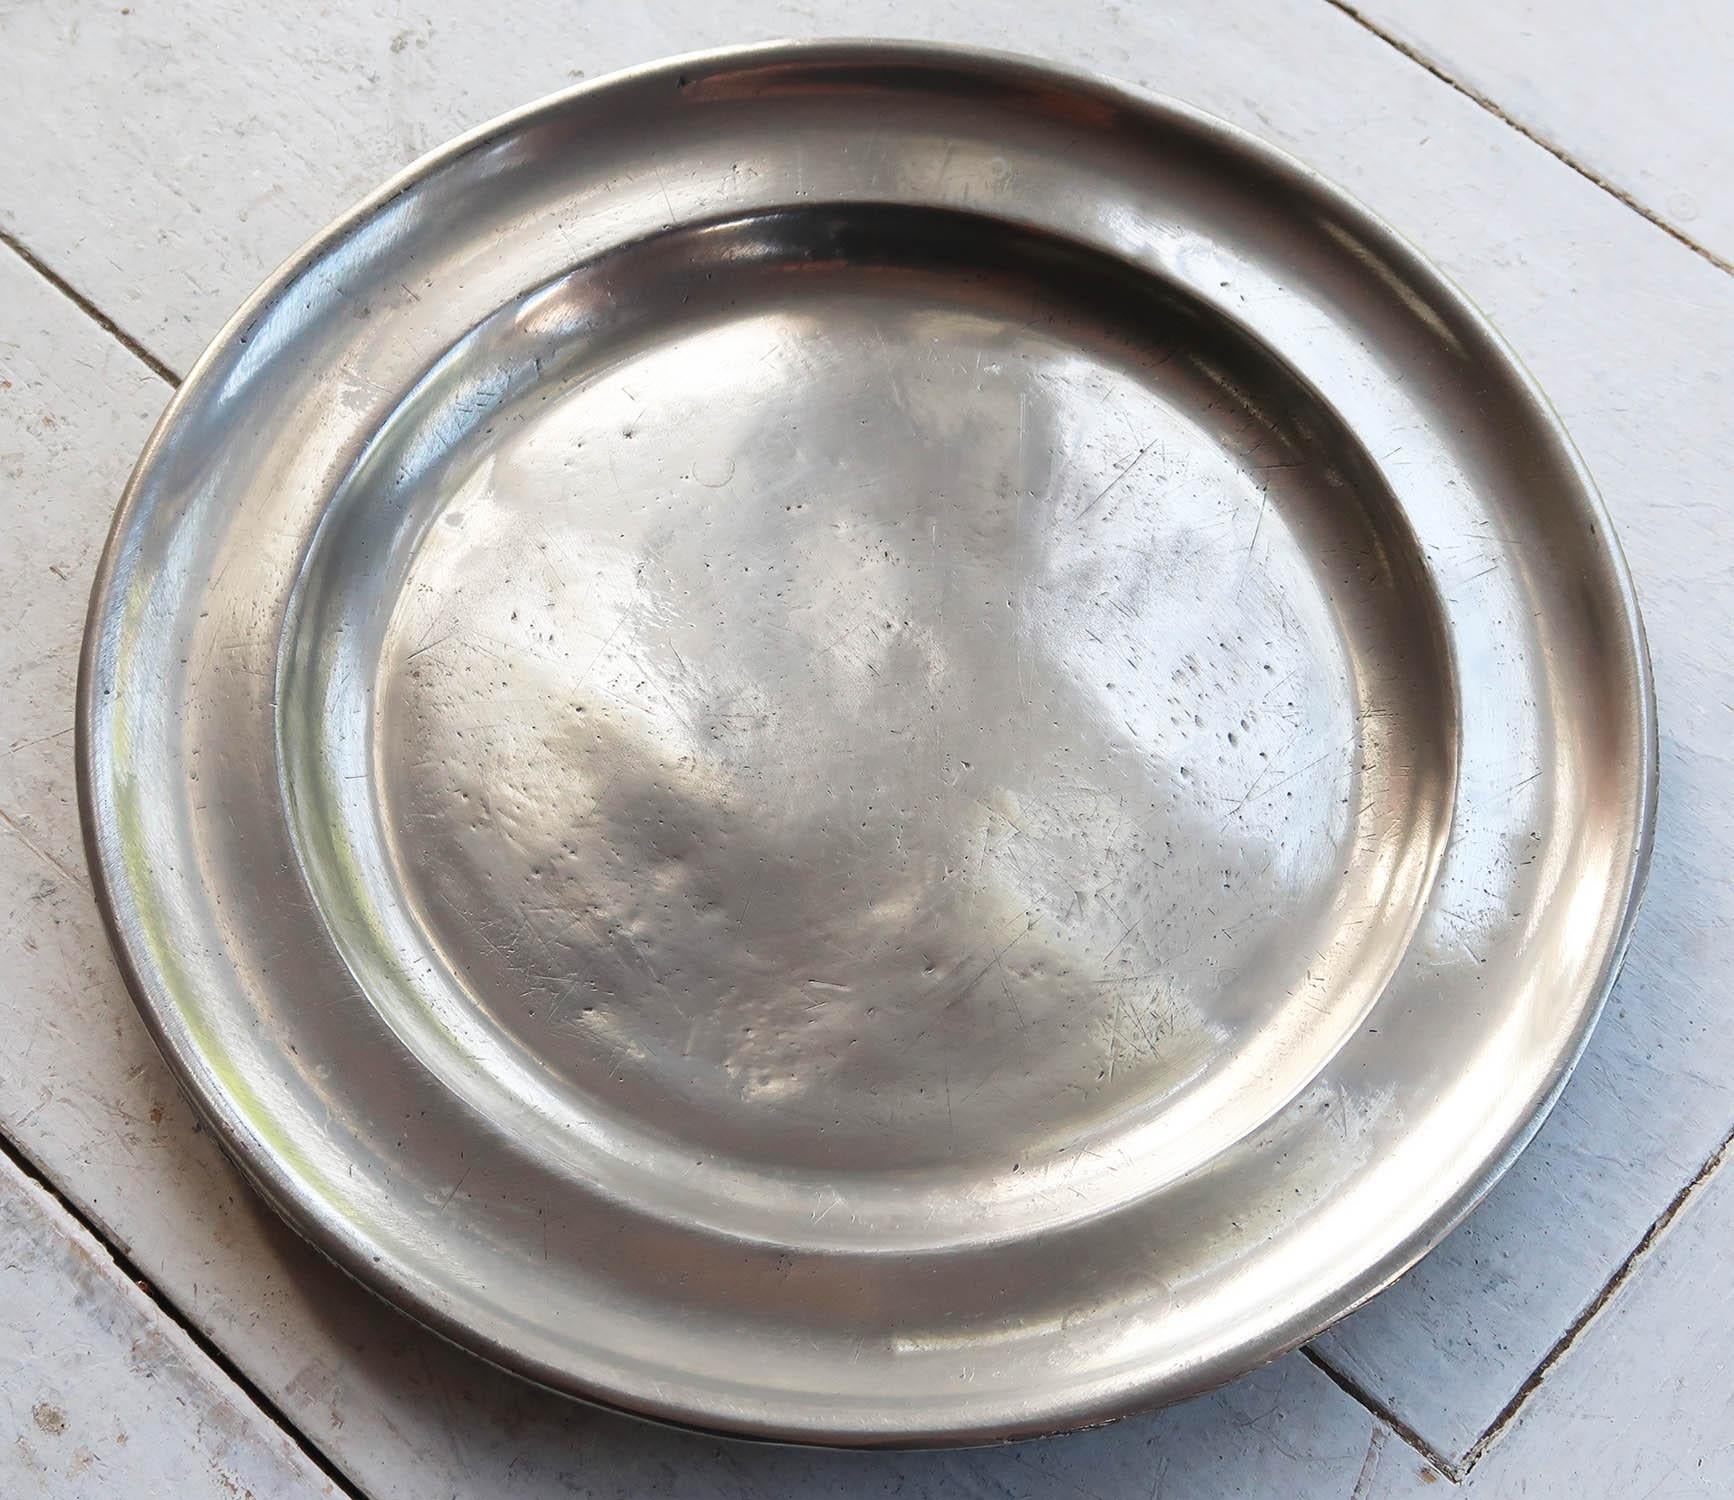 Lovely highly polished pewter plate.

Evidence of a rubbed touchmark on the underside. Shown in the last image.

The pewter has been polished to its original shine to imitate polished silver. It was known as the Poor Man's Silver.

The great thing